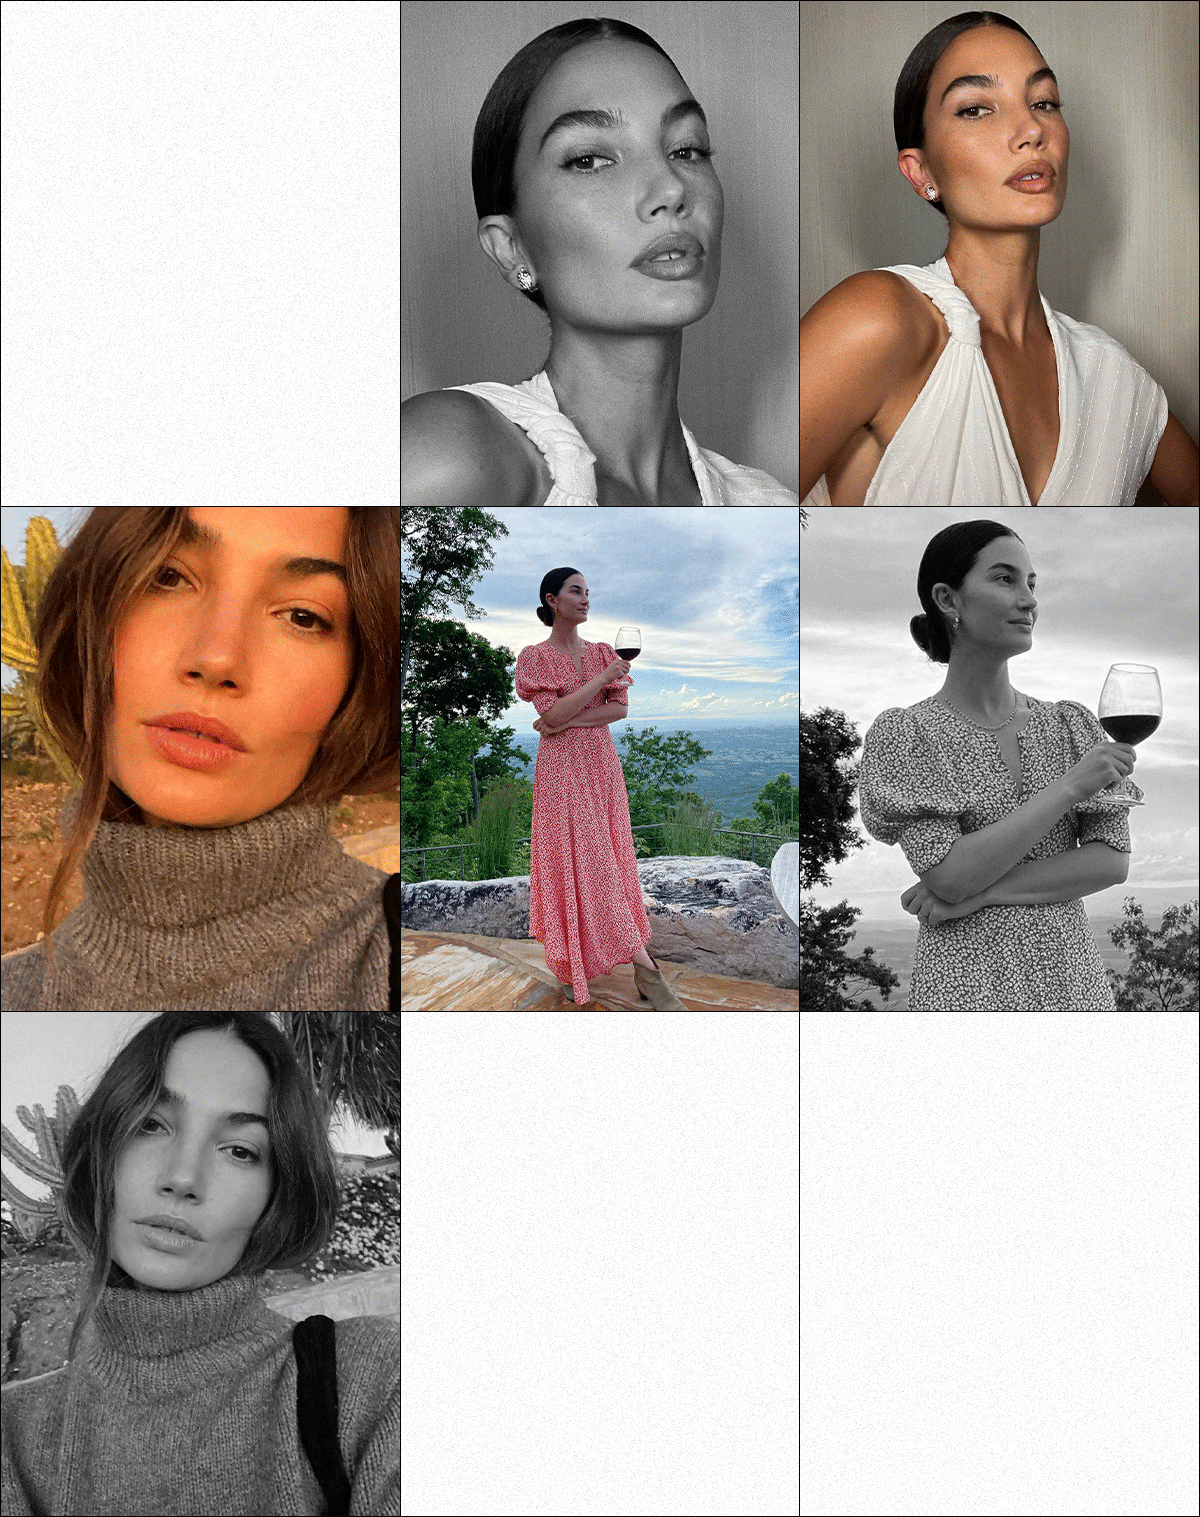 A Look at Lily Aldridge's Wellness Routine